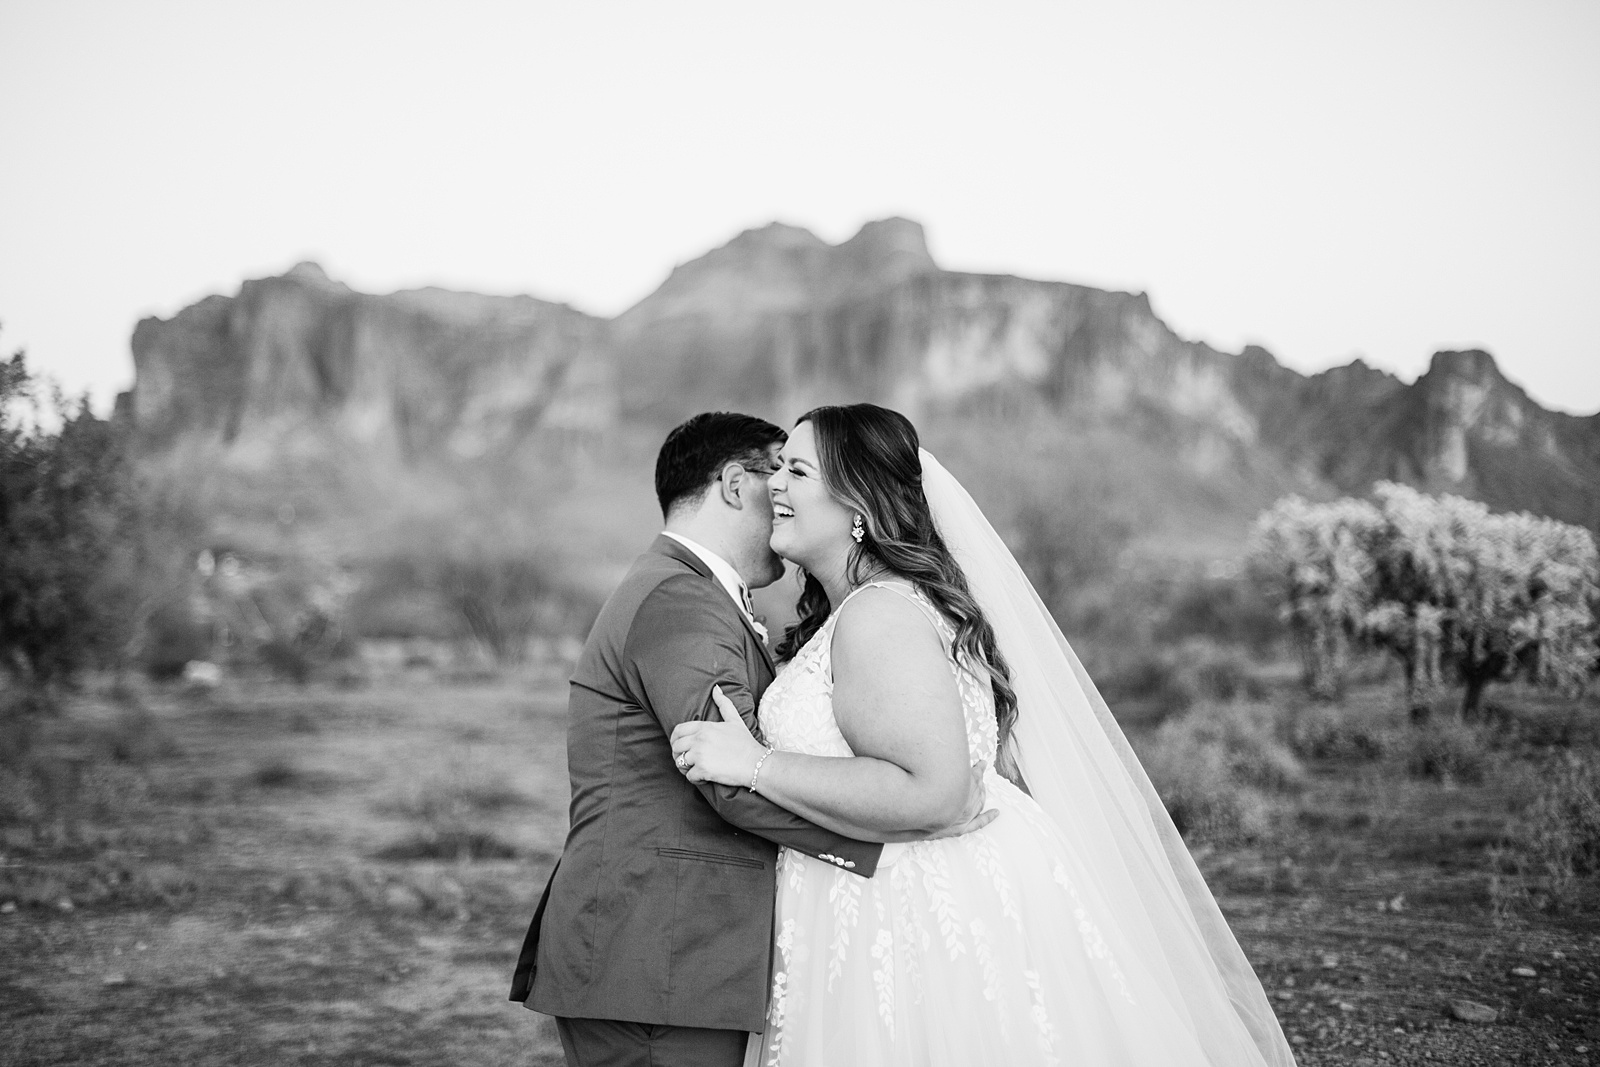 Bride & Groom laughing together during their a Phoenix desert intimate wedding by Arizona wedding photographer Juniper and Co Photography.